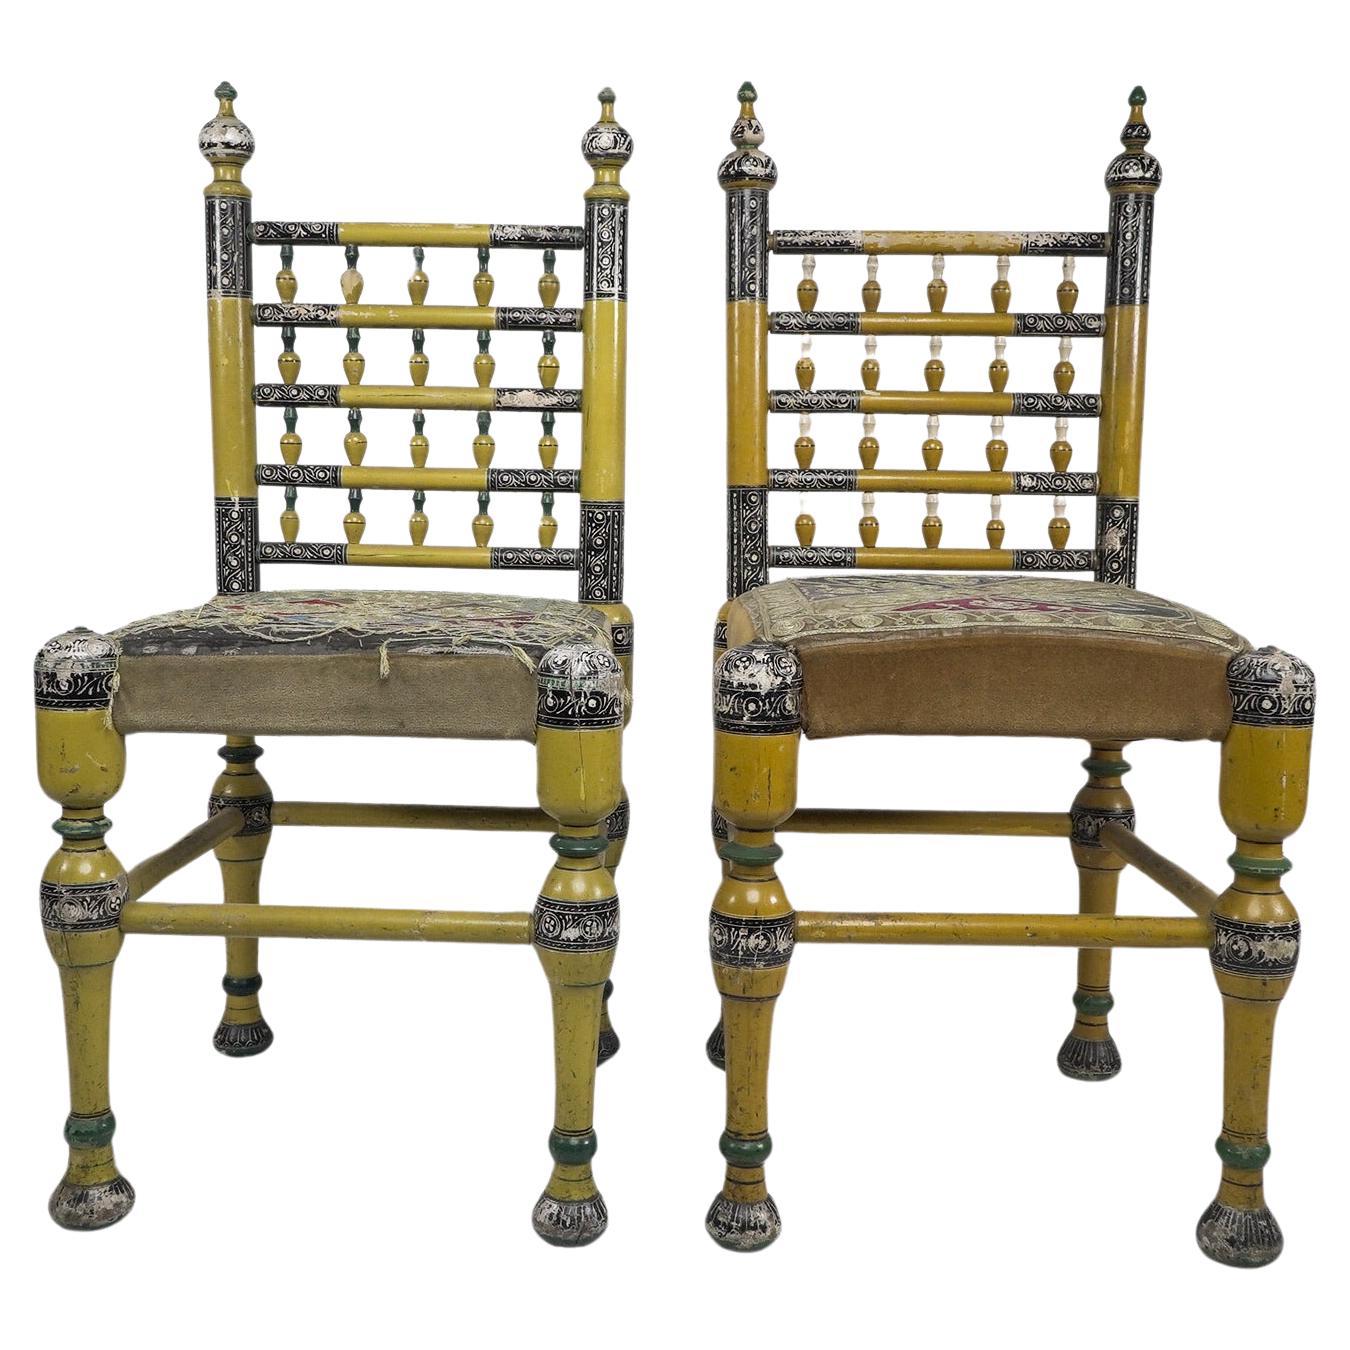 Indian Rajasthani. A rare pair of period side chairs finely painted in polychrome colours with the original floral gilt chord embroidery seats, the seats a little worn with minor losses to the paint. Price for the pair.
